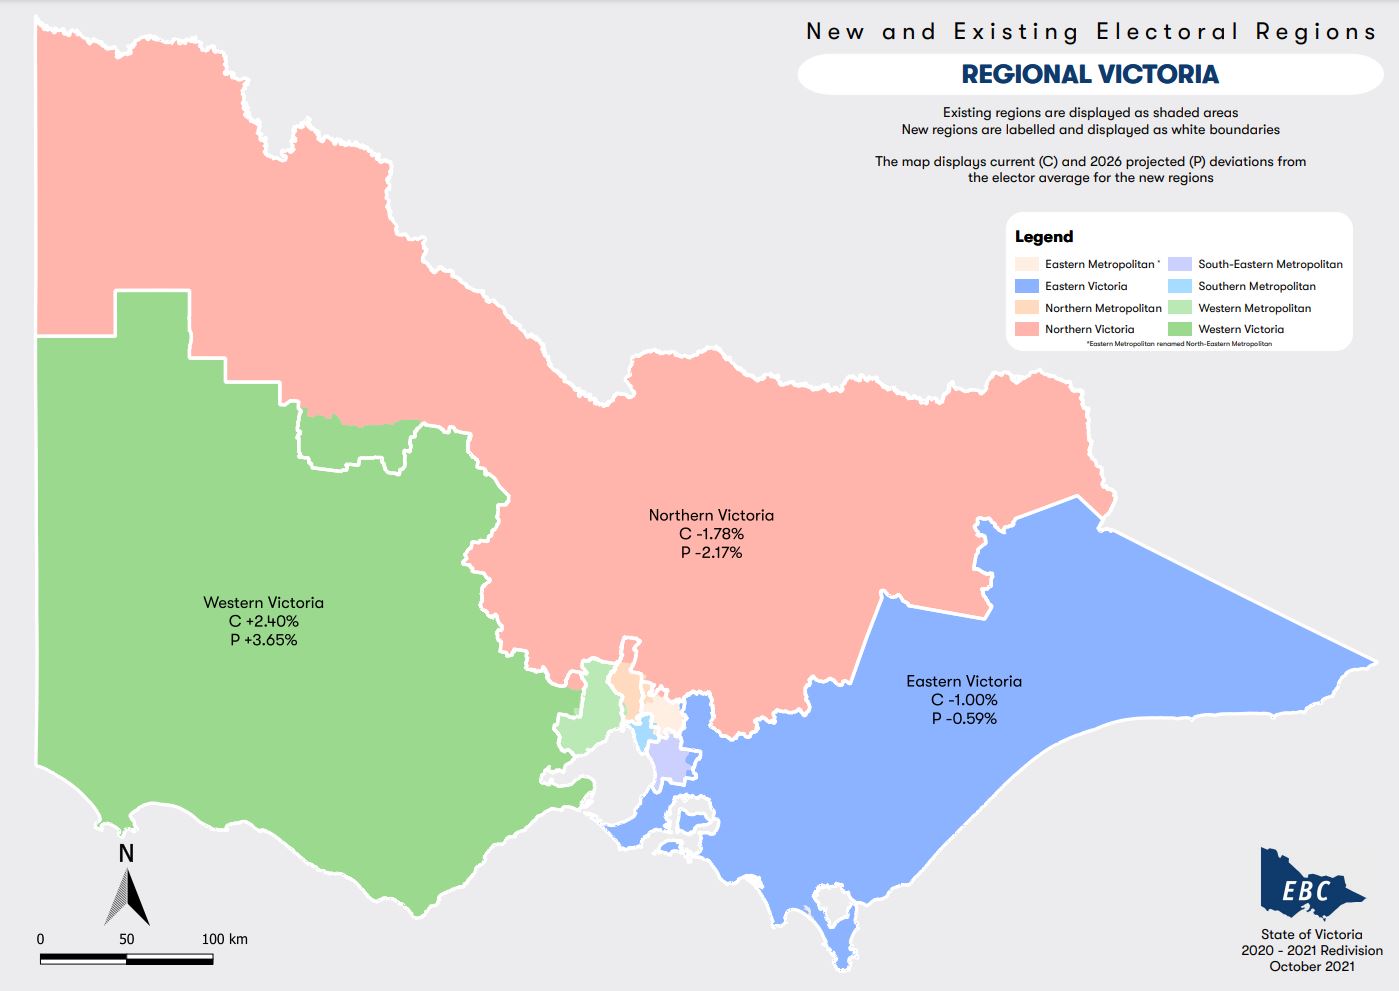 A map of electoral regions in Victoria